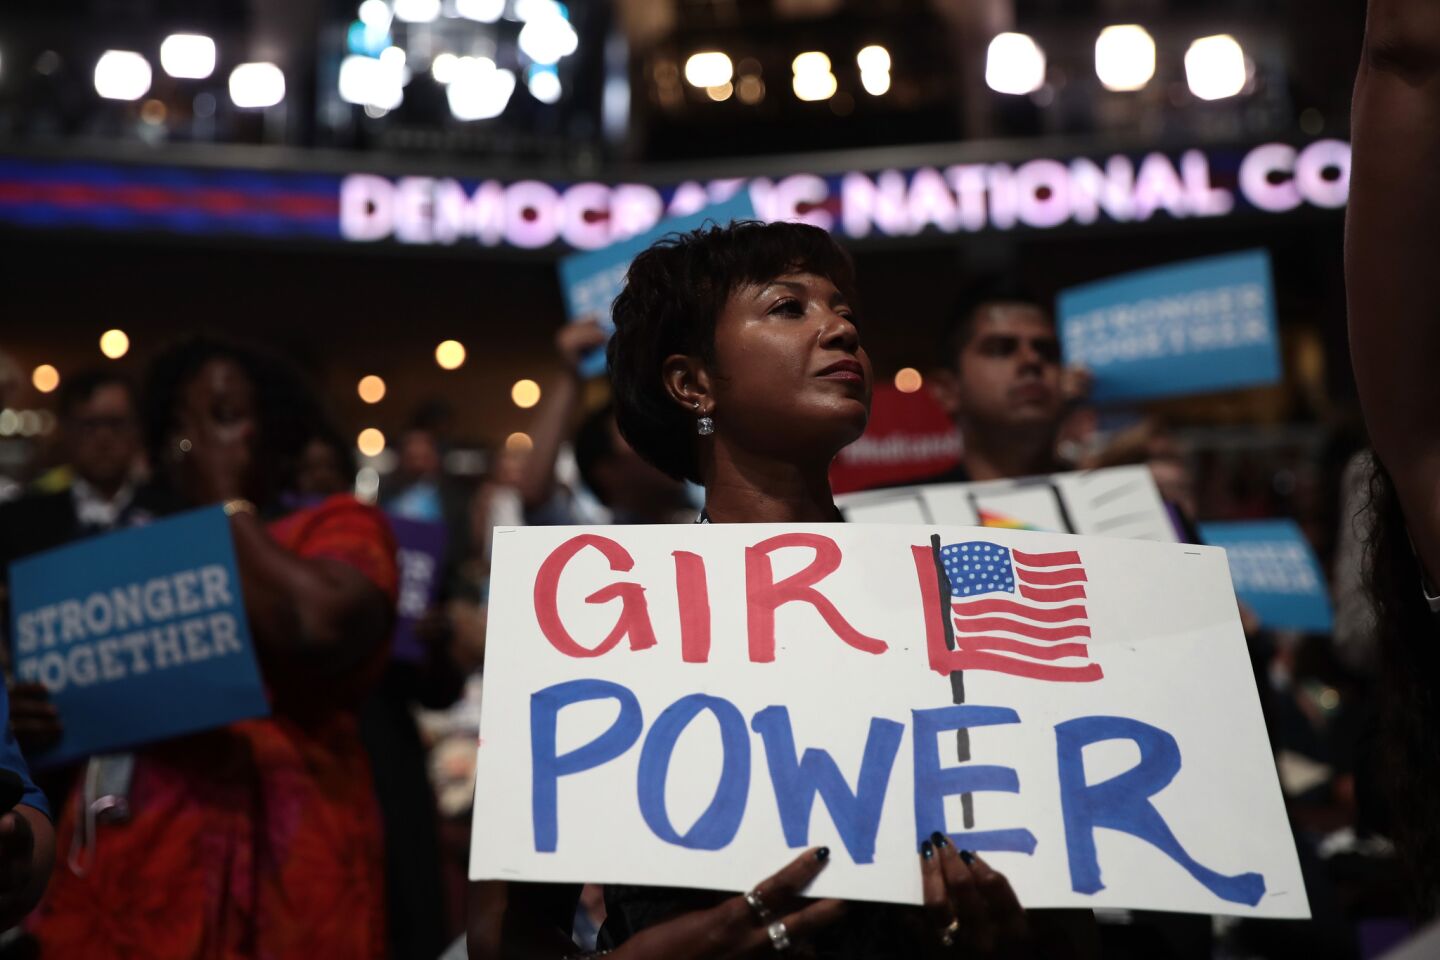 An attendee holds a sign that reads "Girl Power" on the third day of the 2016 Democratic National Convention in Philadelphiaon Wednesday.